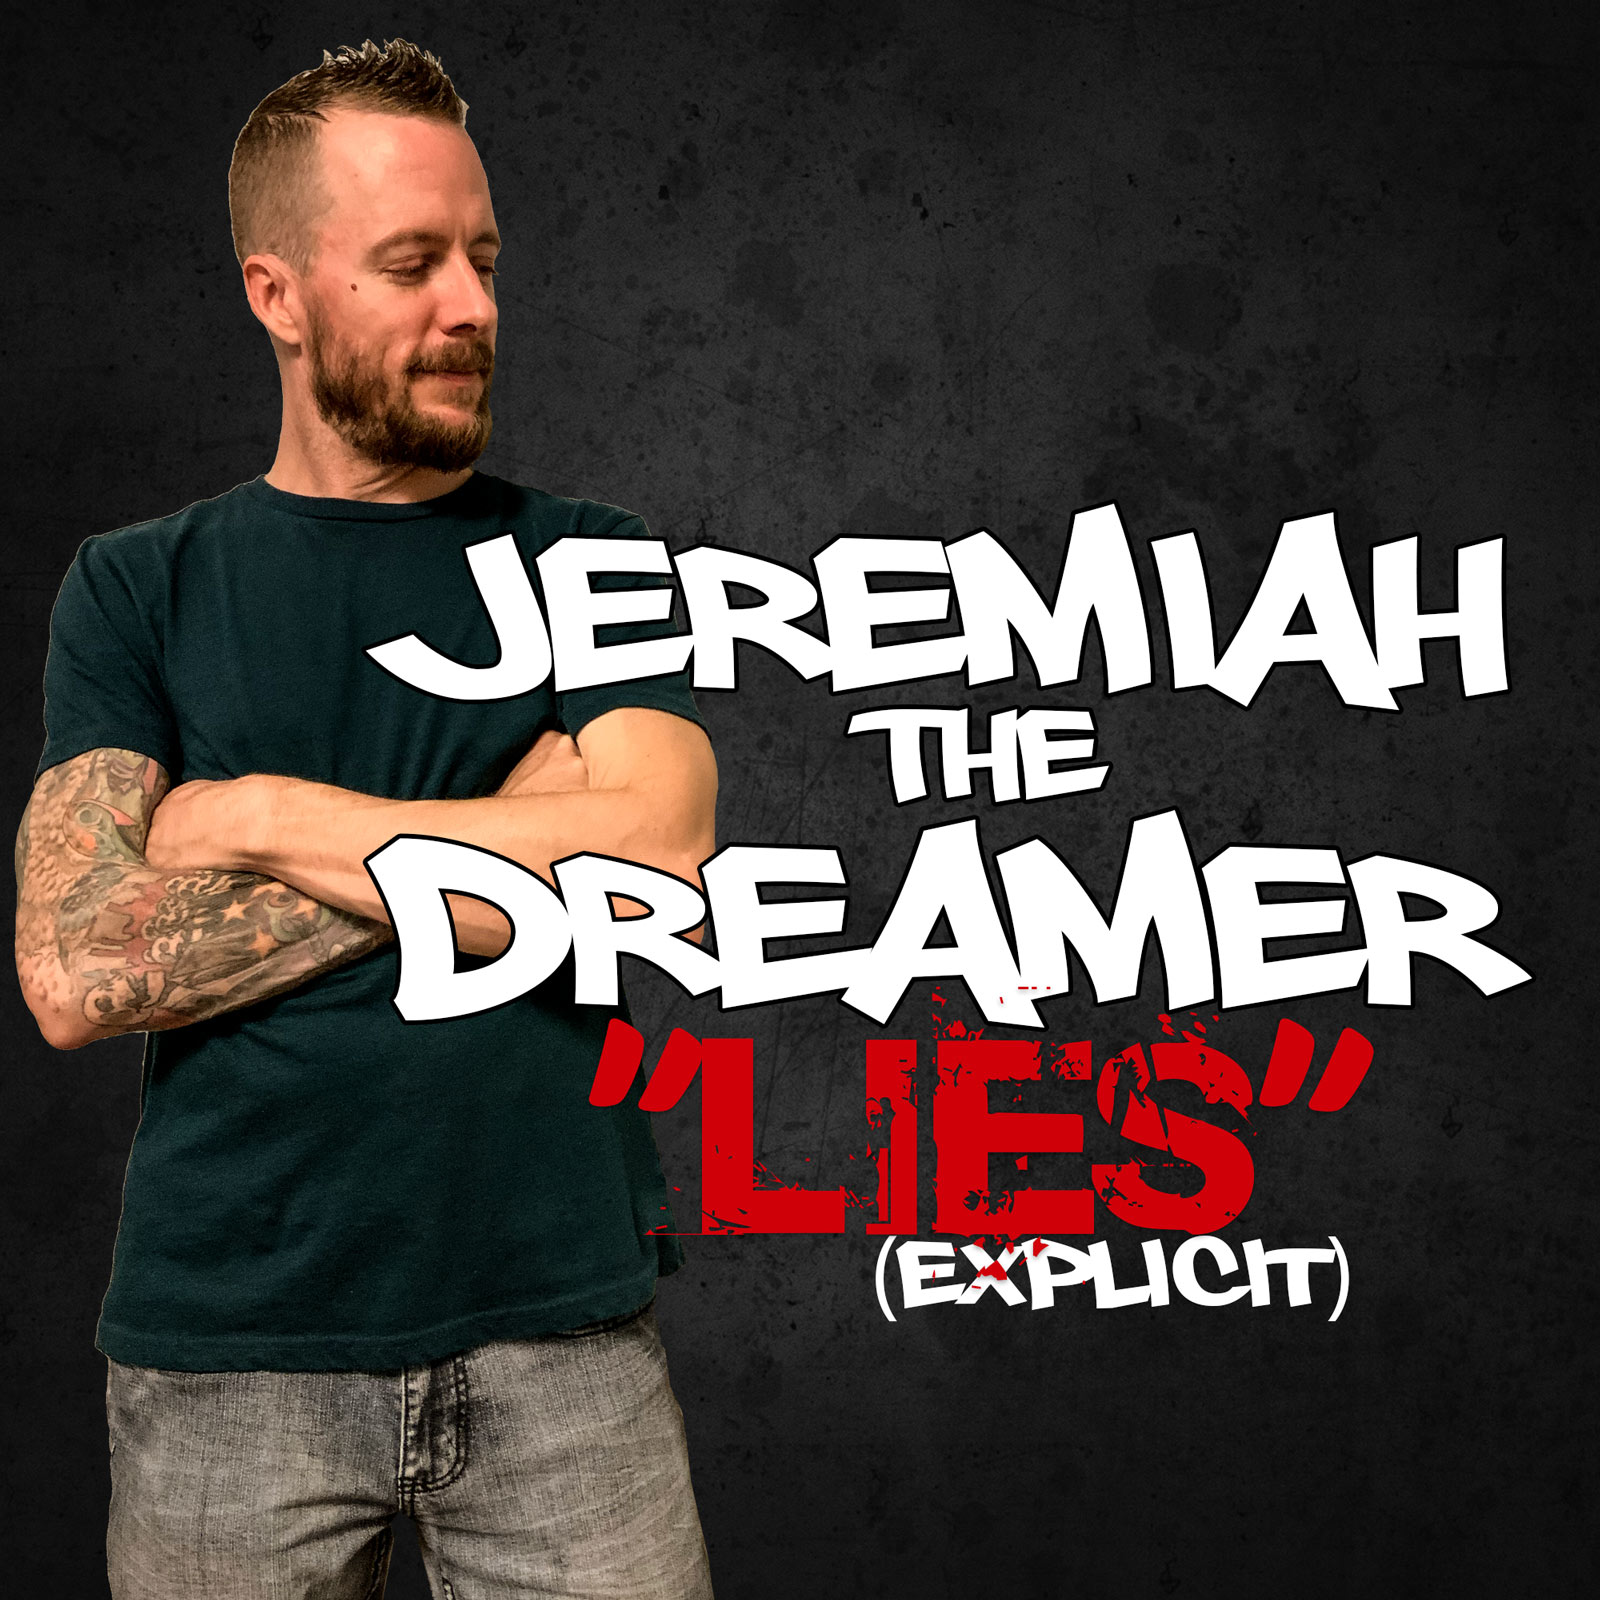 "Lies" by Jeremiah the Dreamer